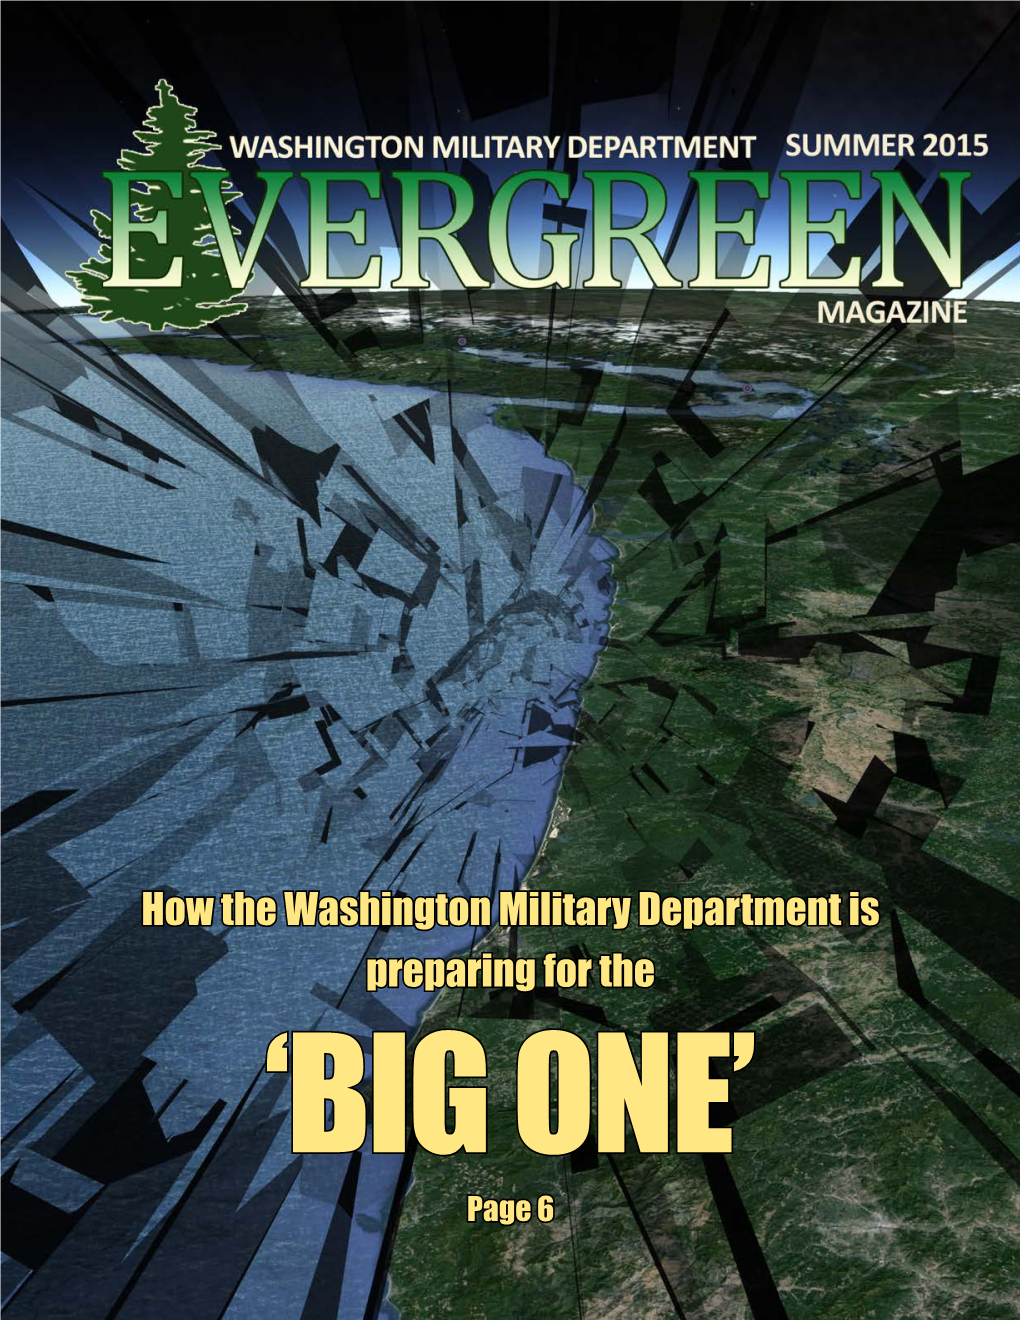 How the Washington Military Department Is Preparing for the ‘BIG ONE’ Page 6